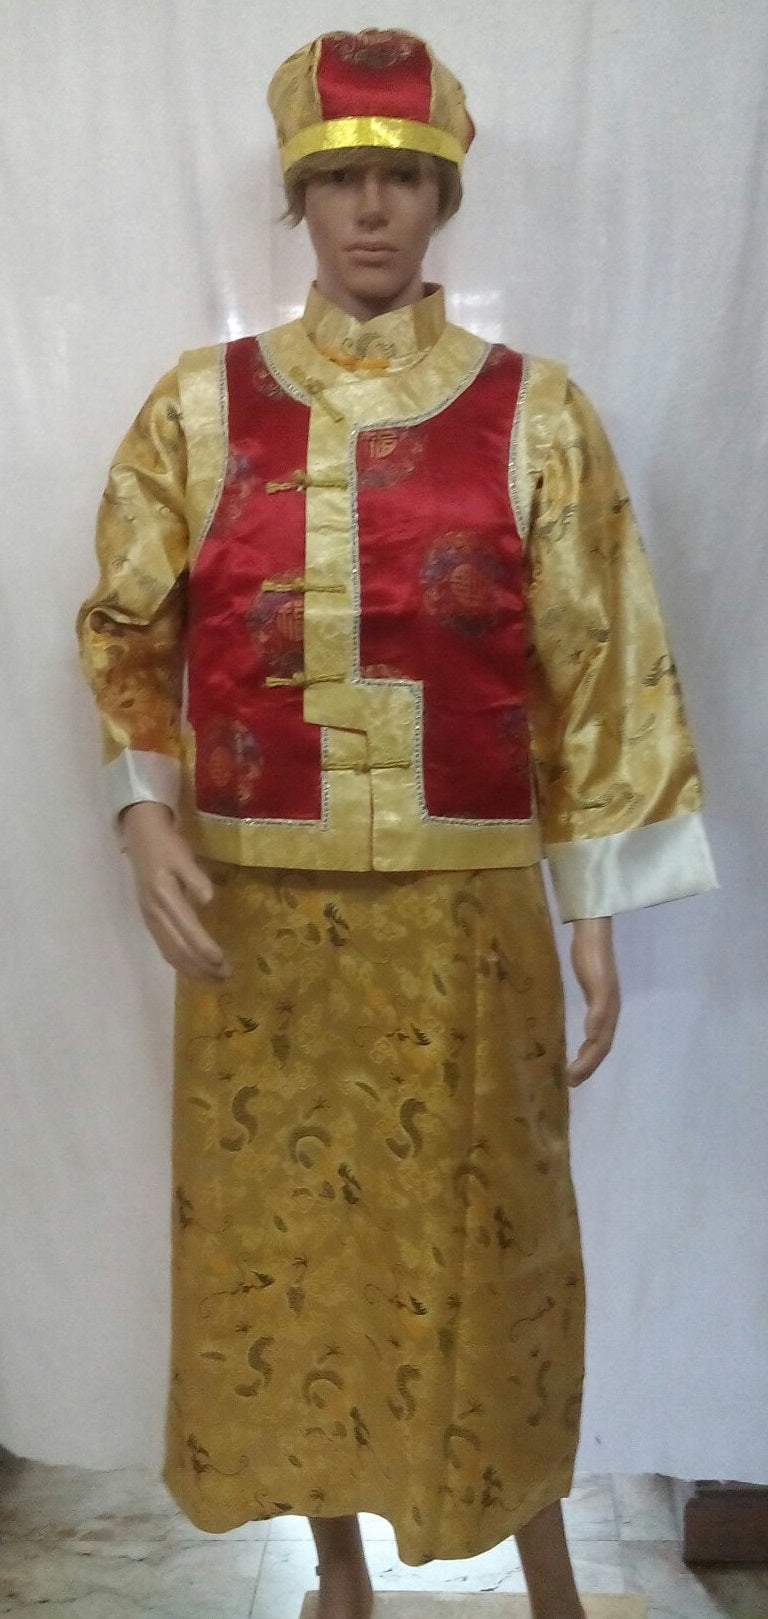 Chinese Gold Costume